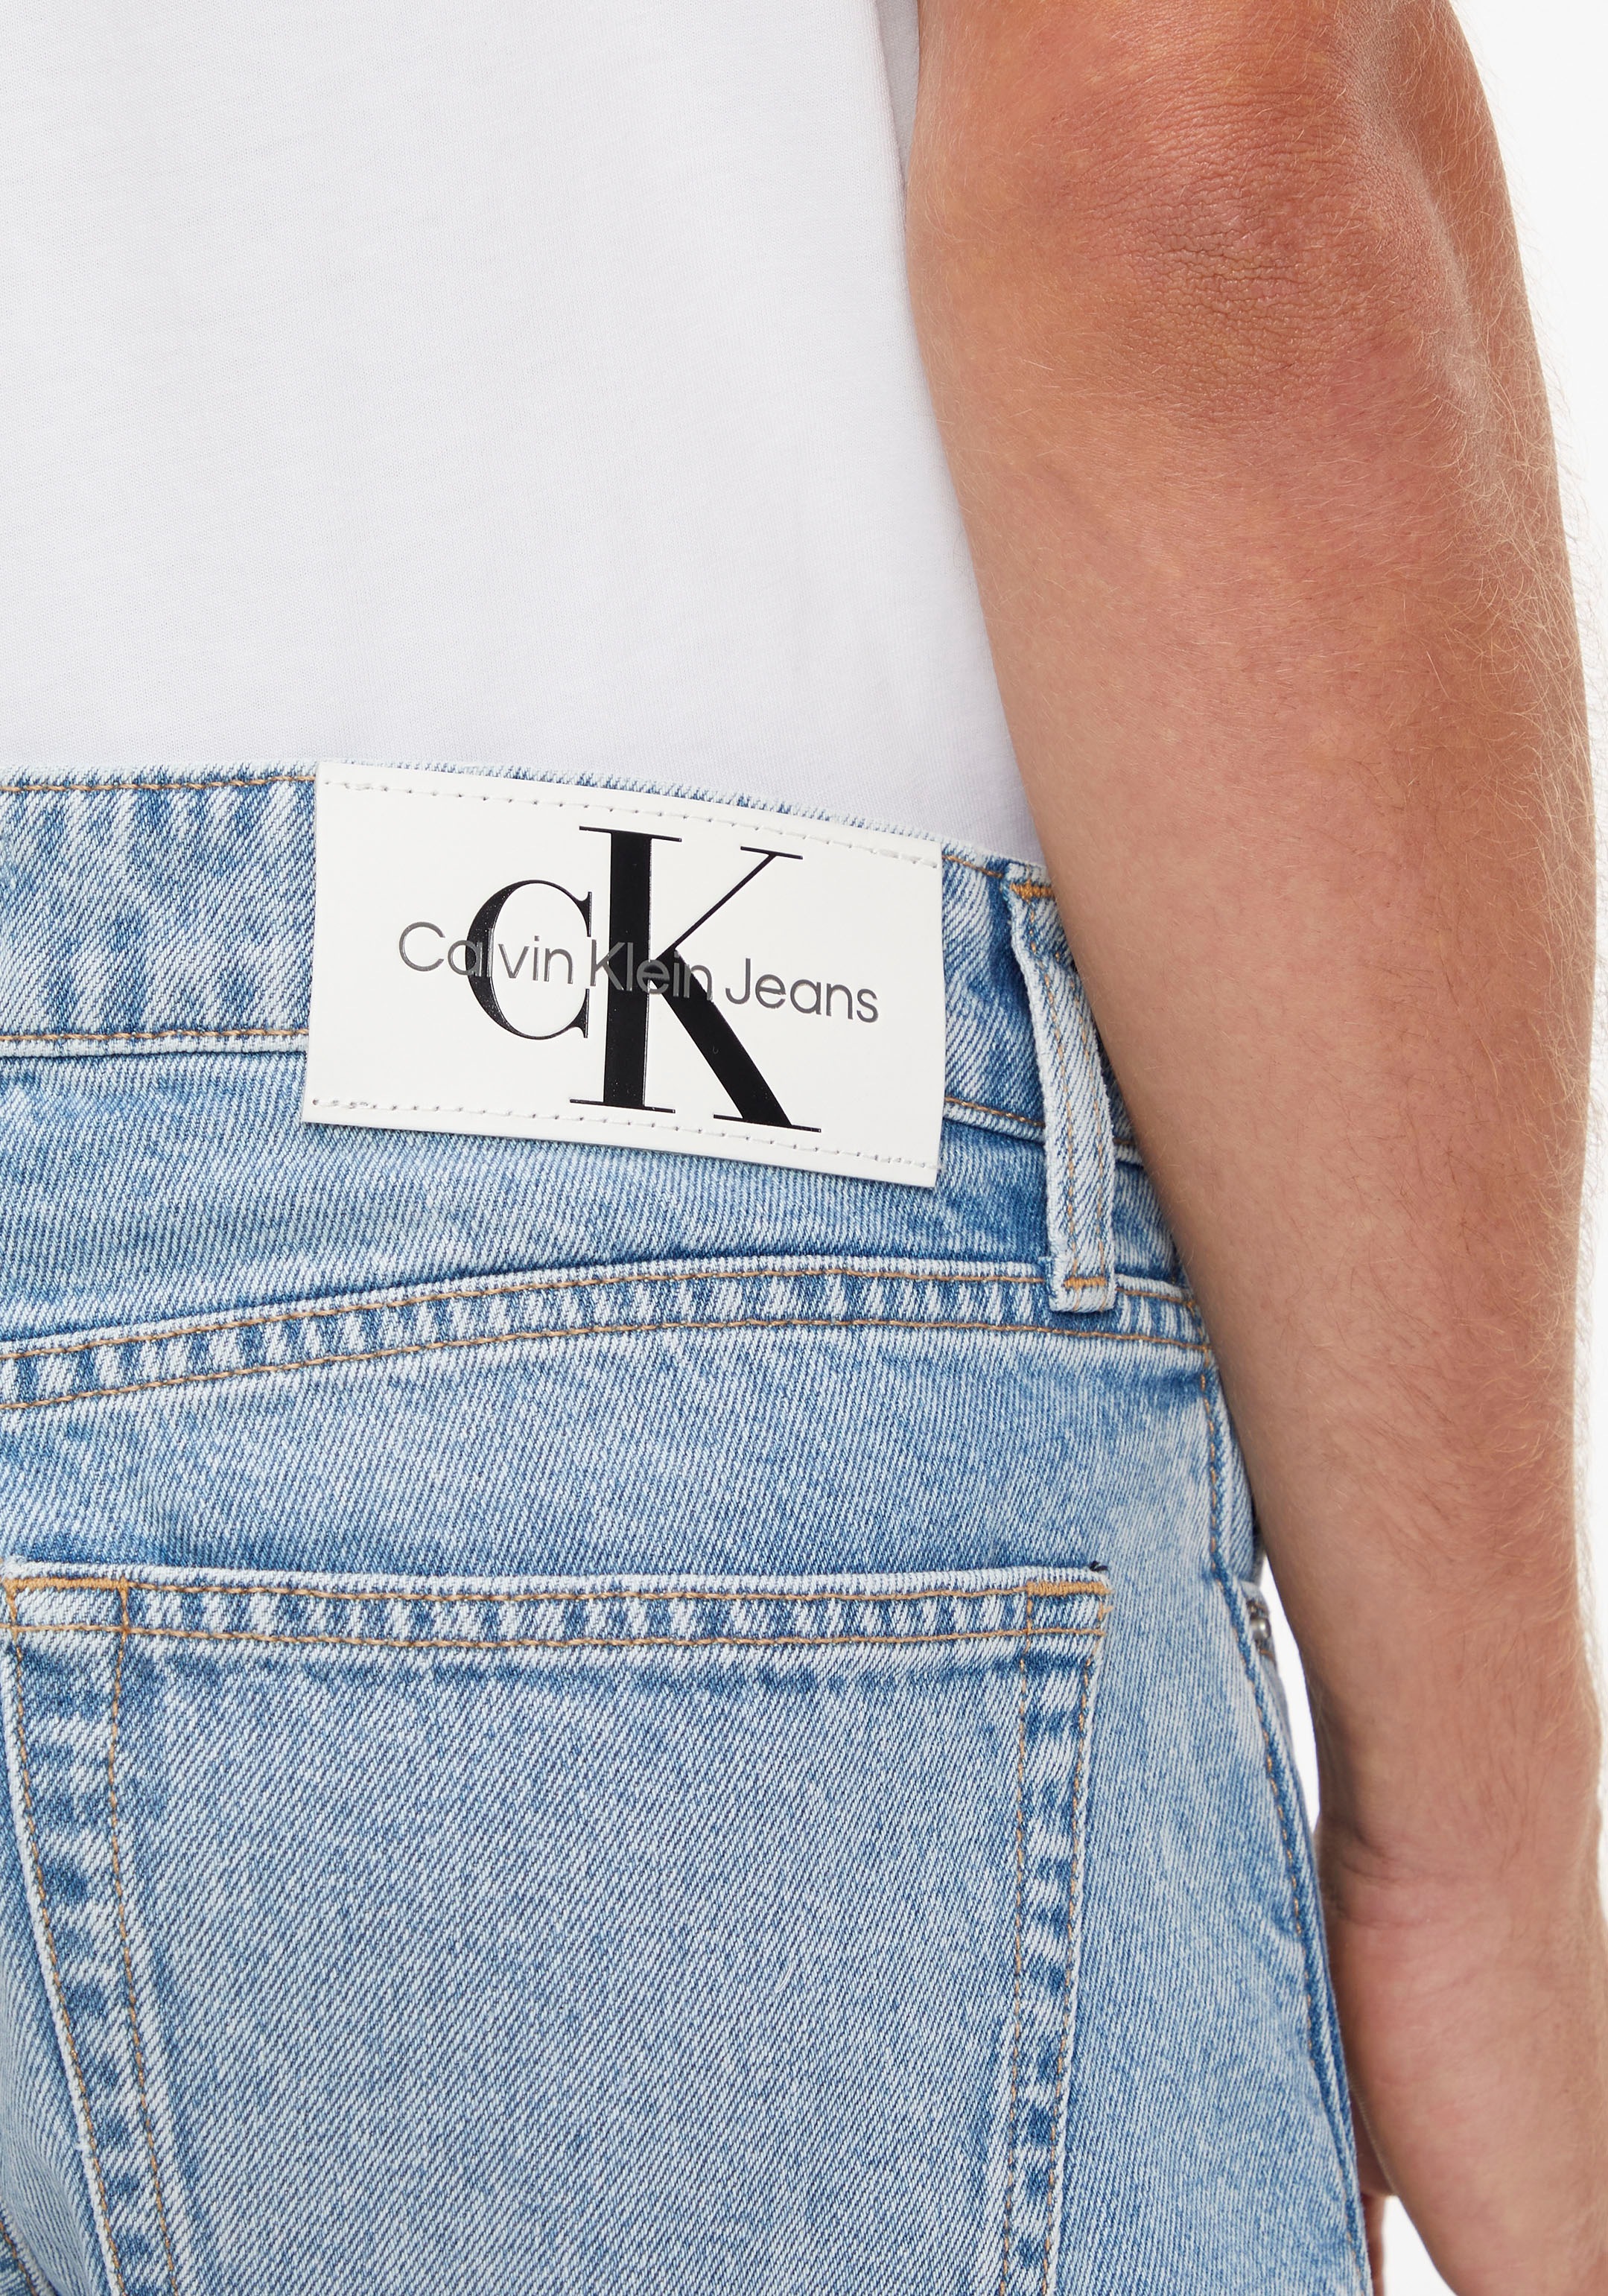 Calvin Klein Jeans Straight-Jeans, in 5-Pocket-Form